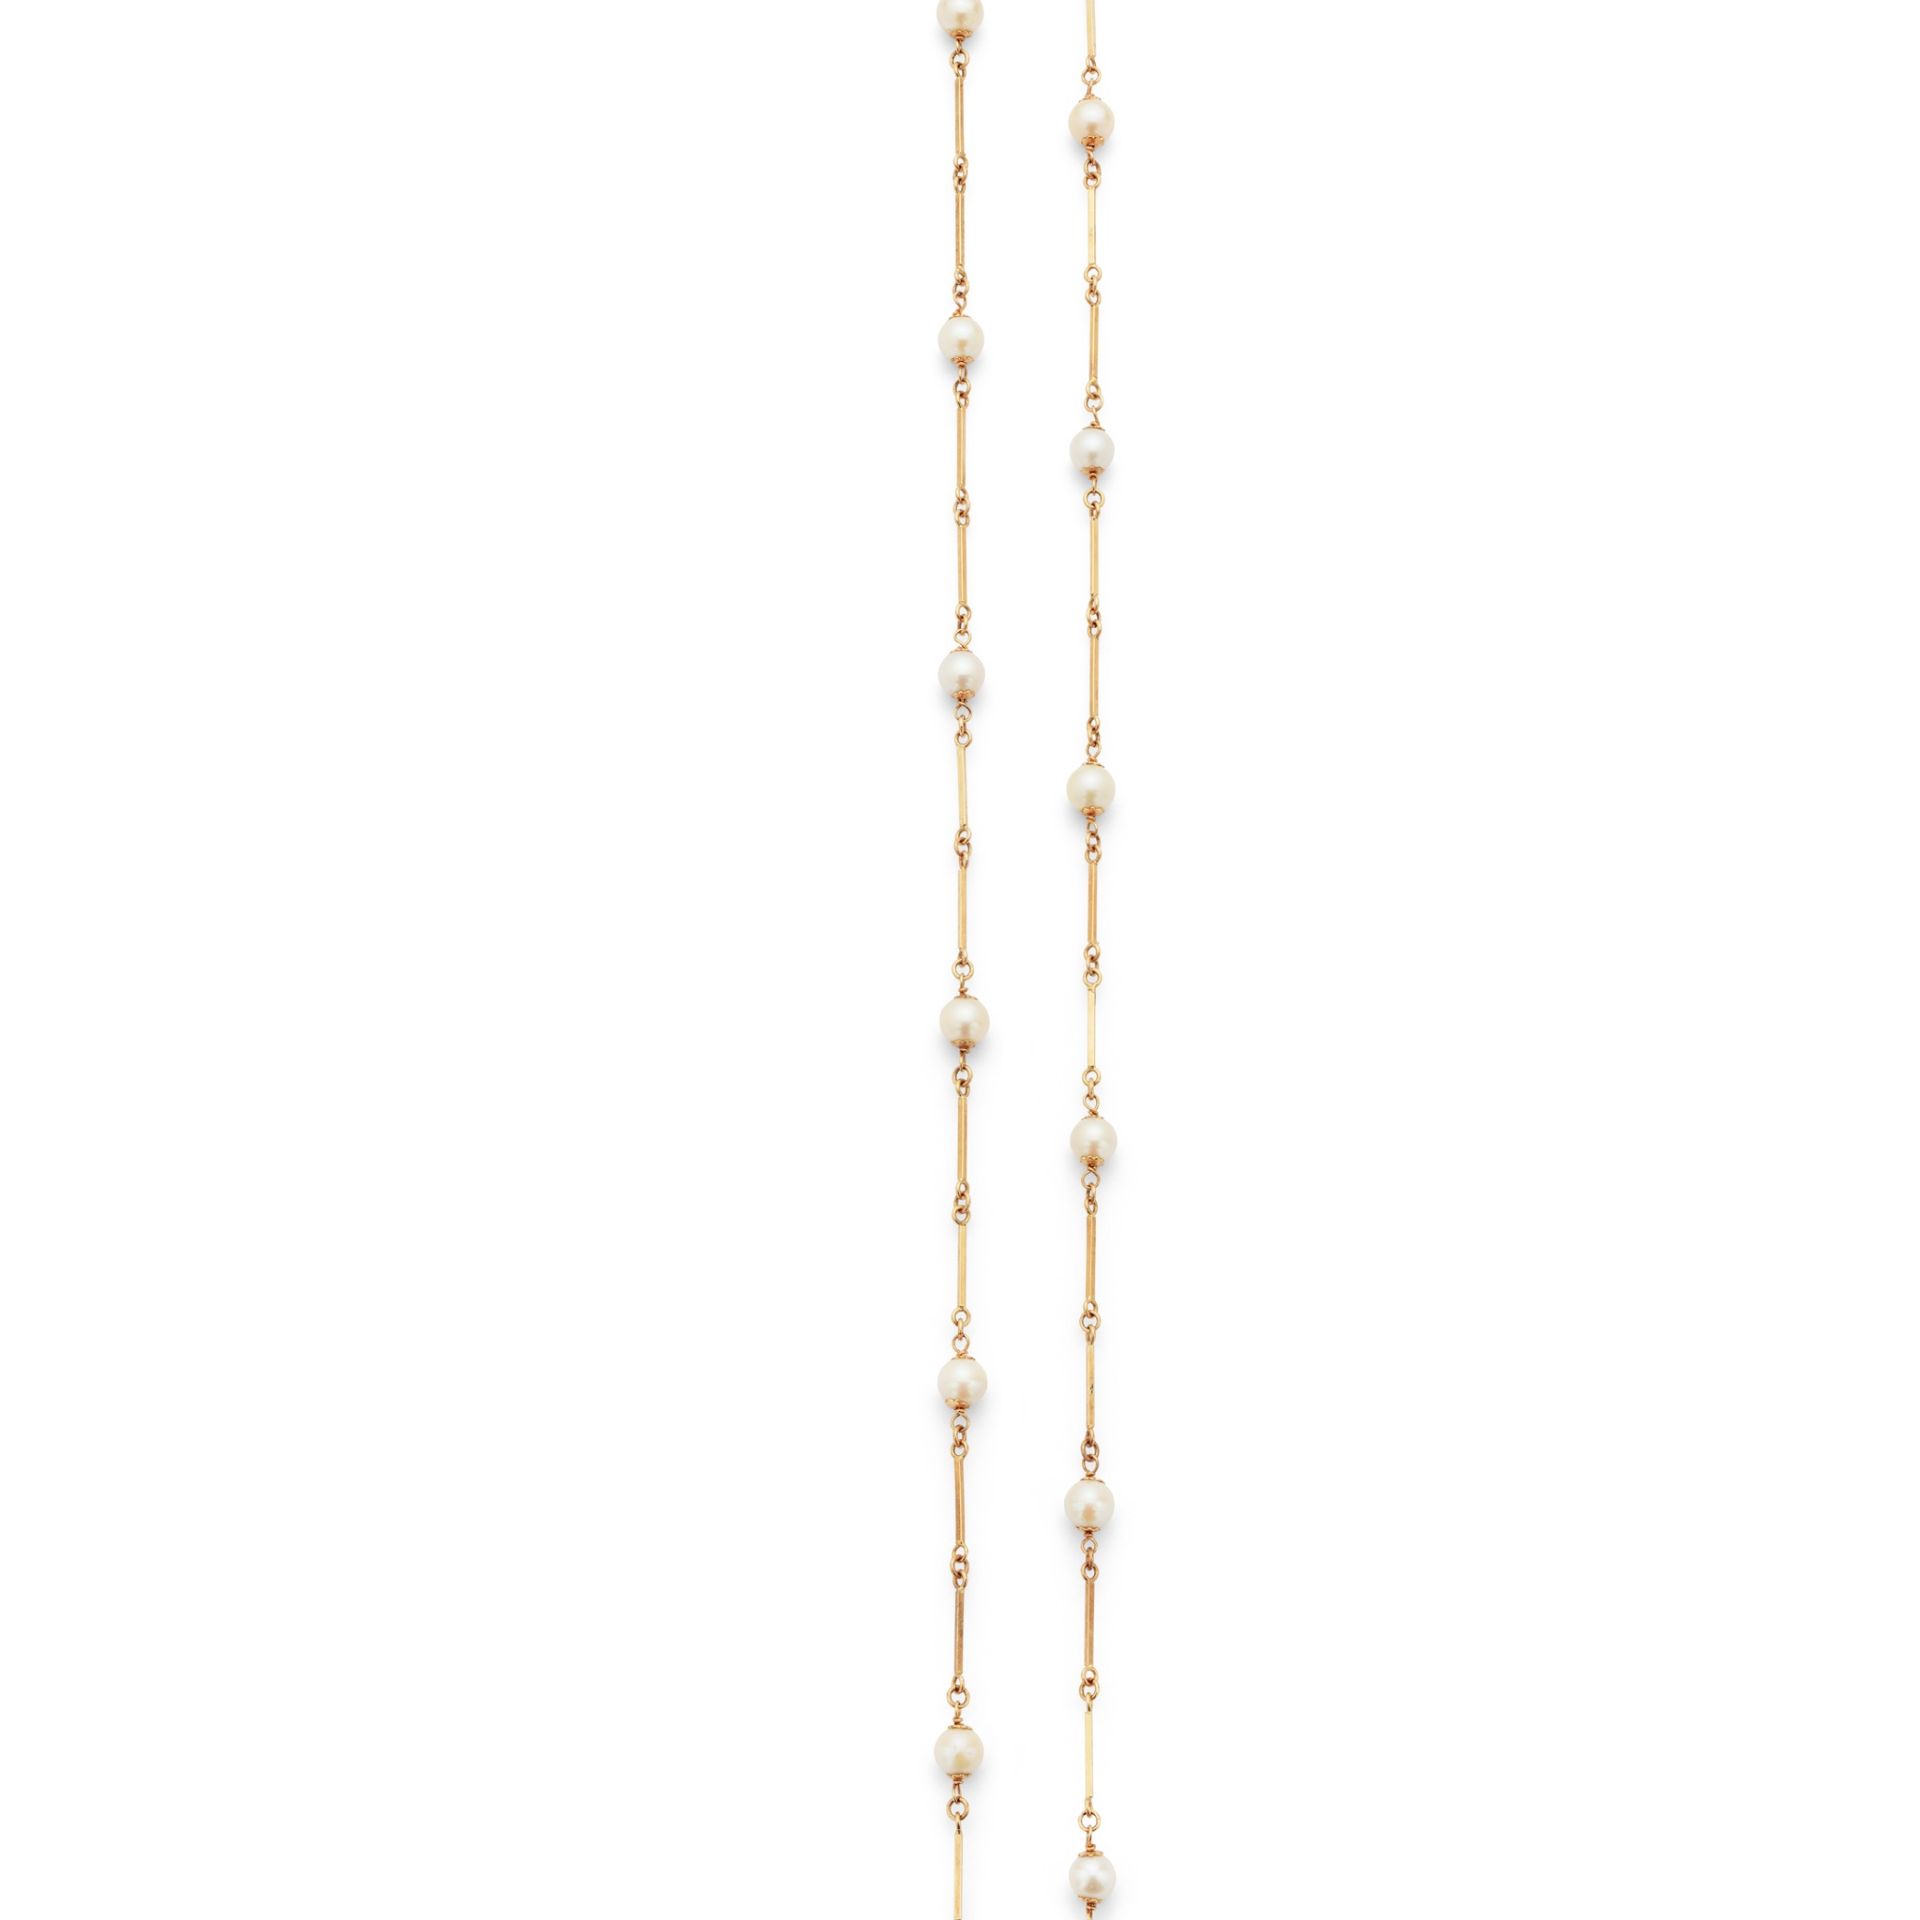 A cultured pearl-set longchain Composed of alternating baton links and 6.8-7.5mm cultured pearls